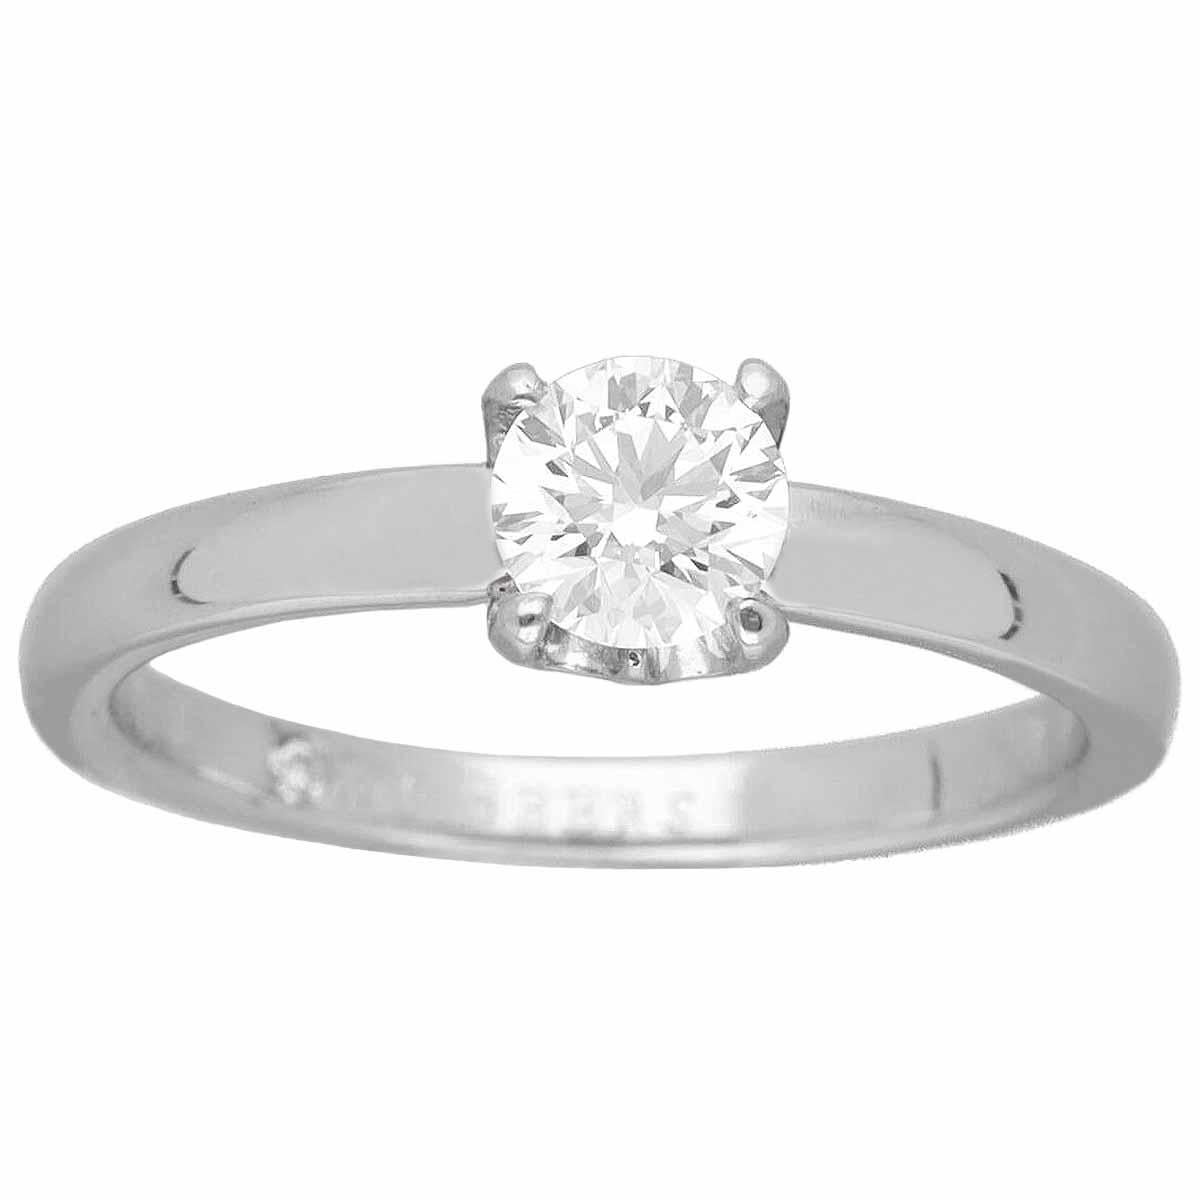 Brand:De Beers
Name:classic solitaire ring
Material:1P diamond (0.32ct I-IF-Ex), Pt950 platinum
Weight:2.7g（Approx)
Ring size(inch):EU:#46/ USA:3 1/2(Approx)
Width(inch):2.03mm / 0.07in(Approx)
Main stone size:4.42-4.44×2.74mm
Comes with:De Beers